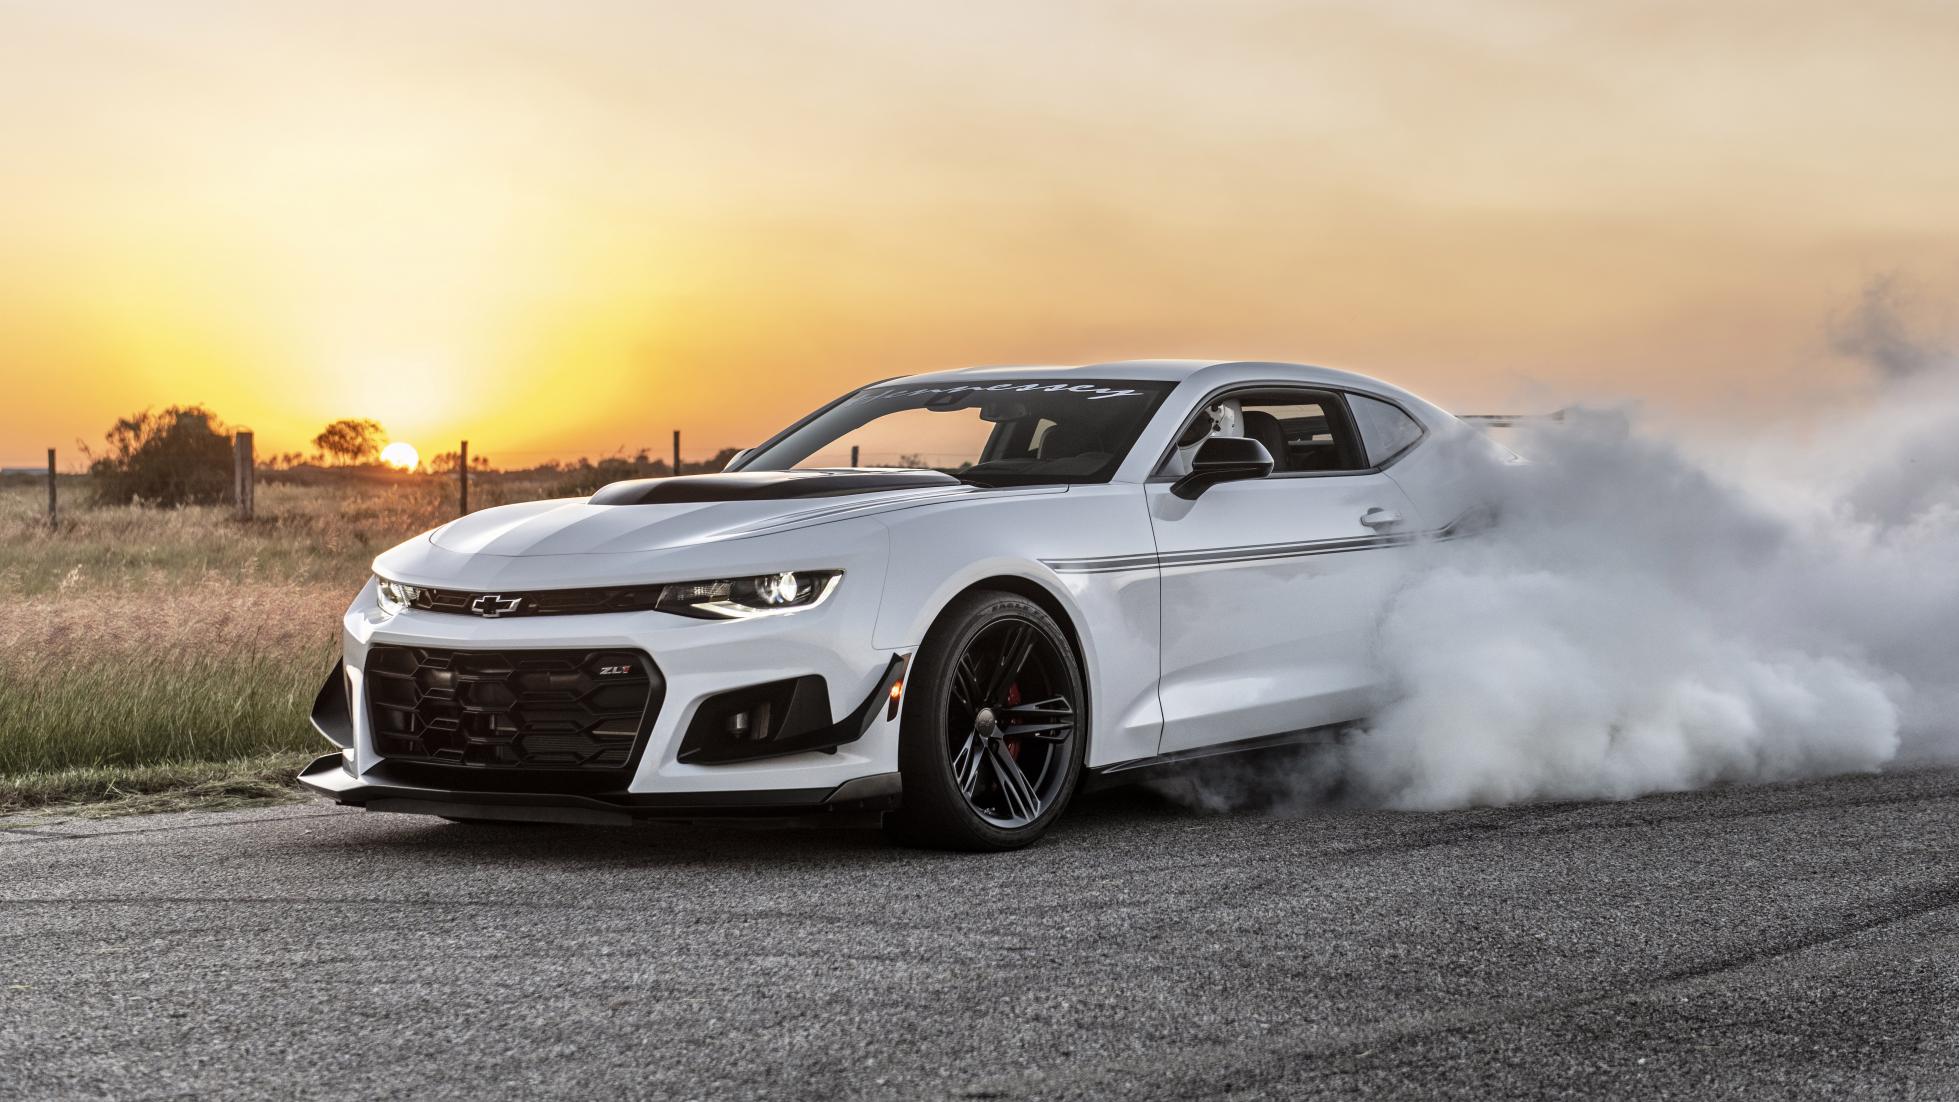 The Hennessey Resurrection is a 1,200bhp Chevy Camaro